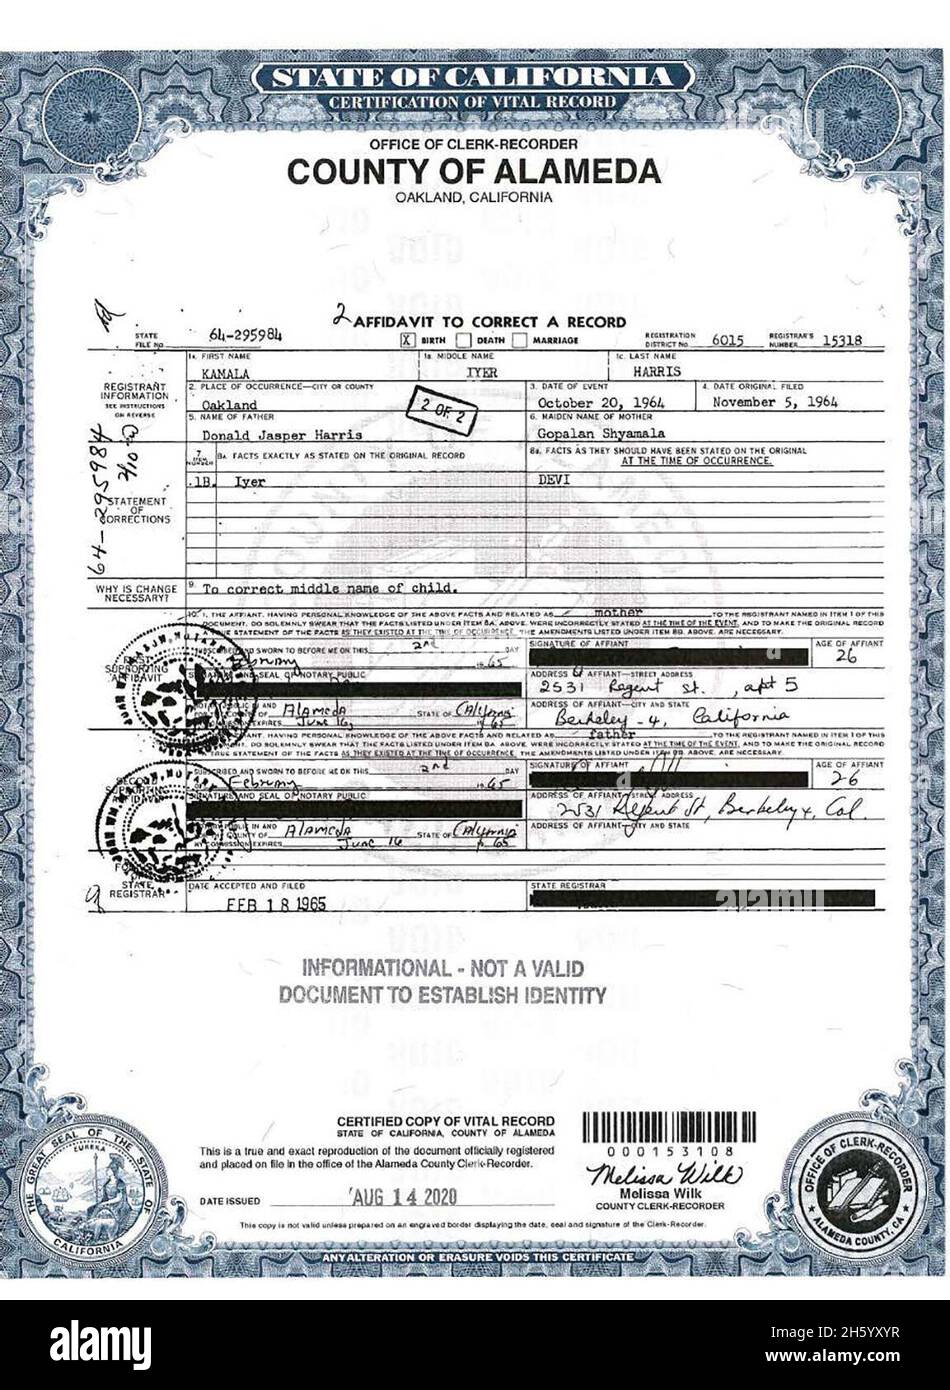 Amendment correcting the middle name of Kamala Harris on the original birth certificate to Devi ca. 14 August 2020 Stock Photo